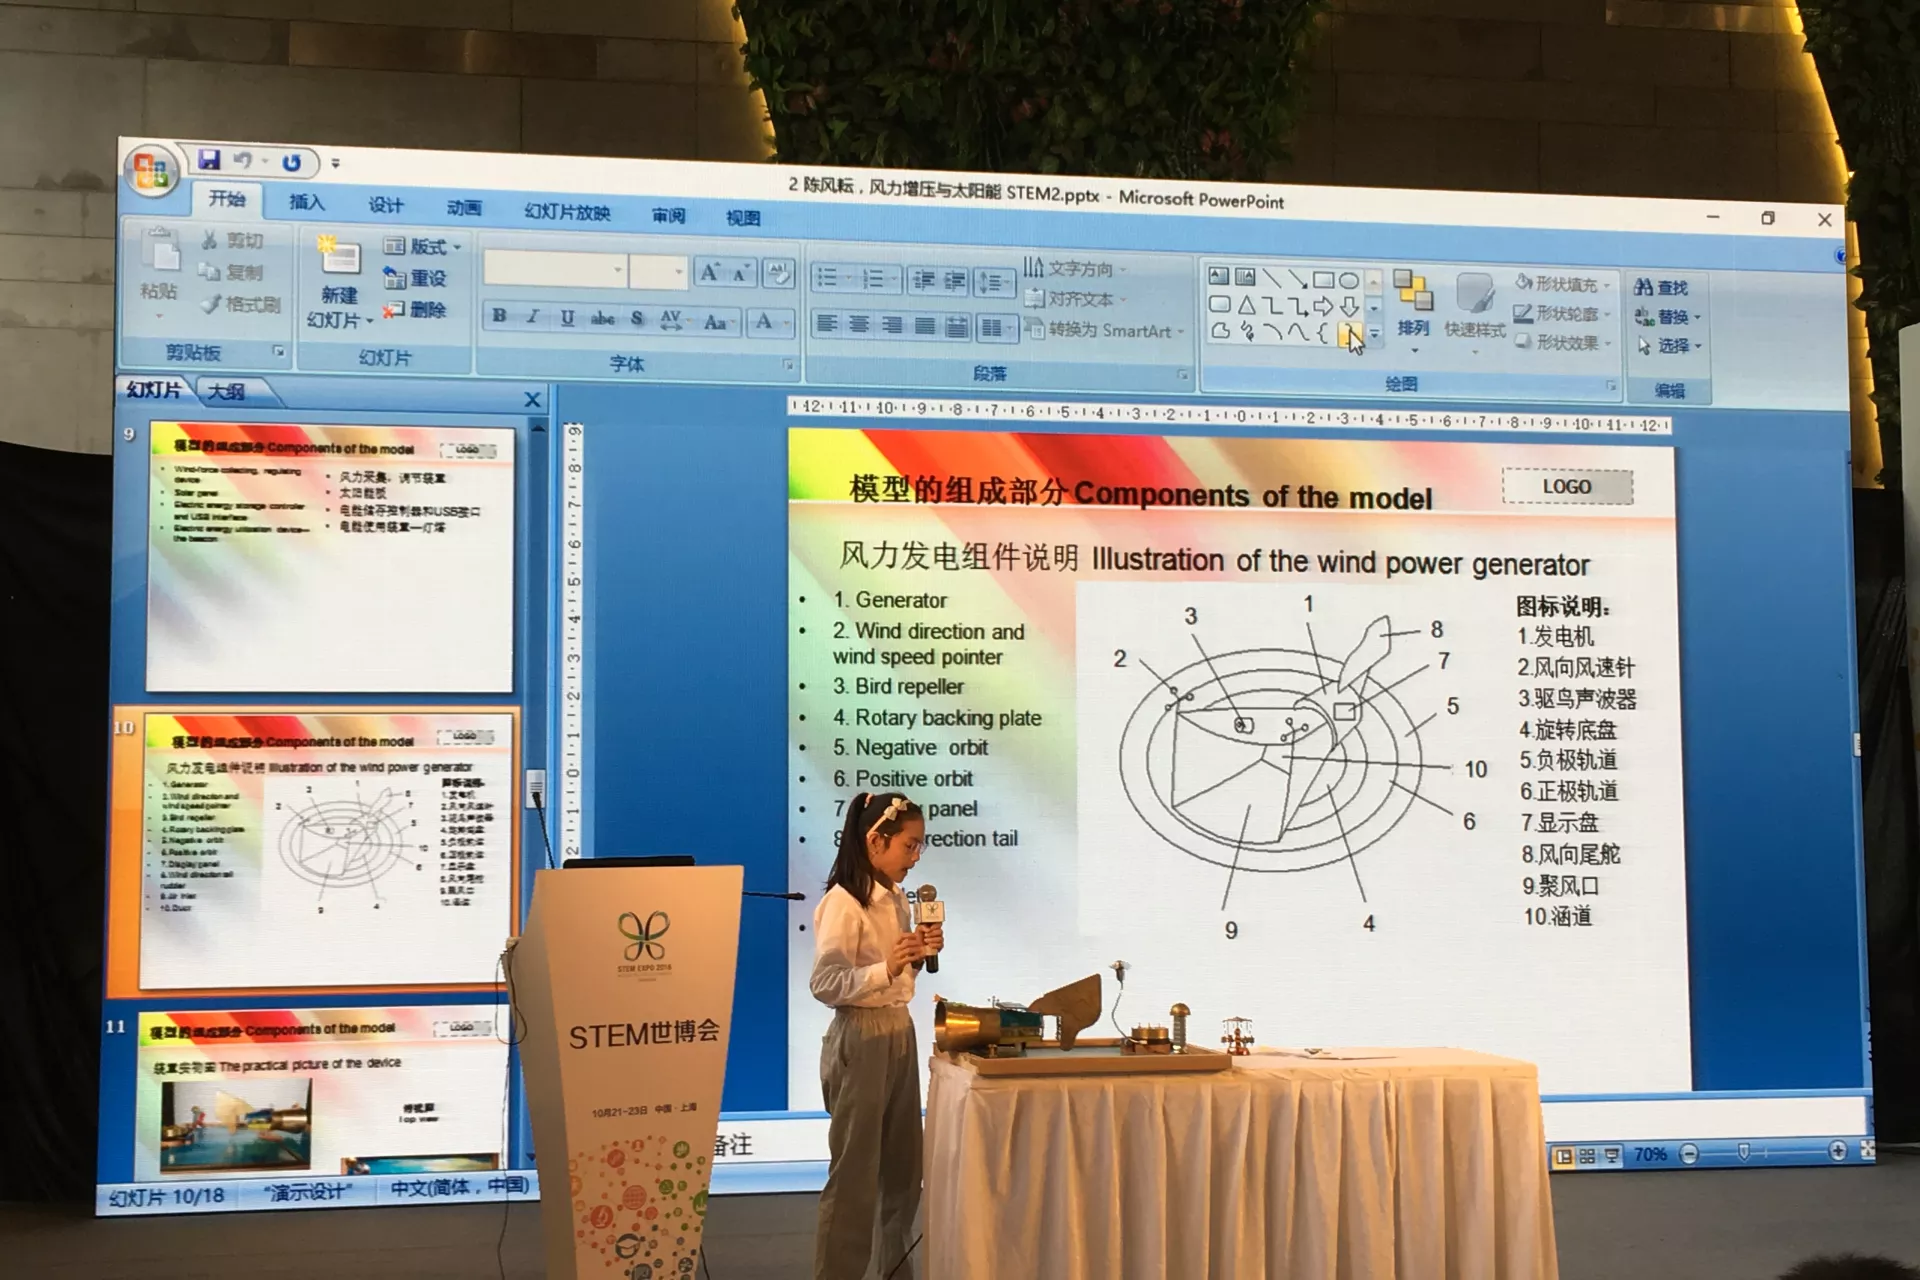 Chen Fengyun introduces her invention at the STEM Expo in Shanghai.